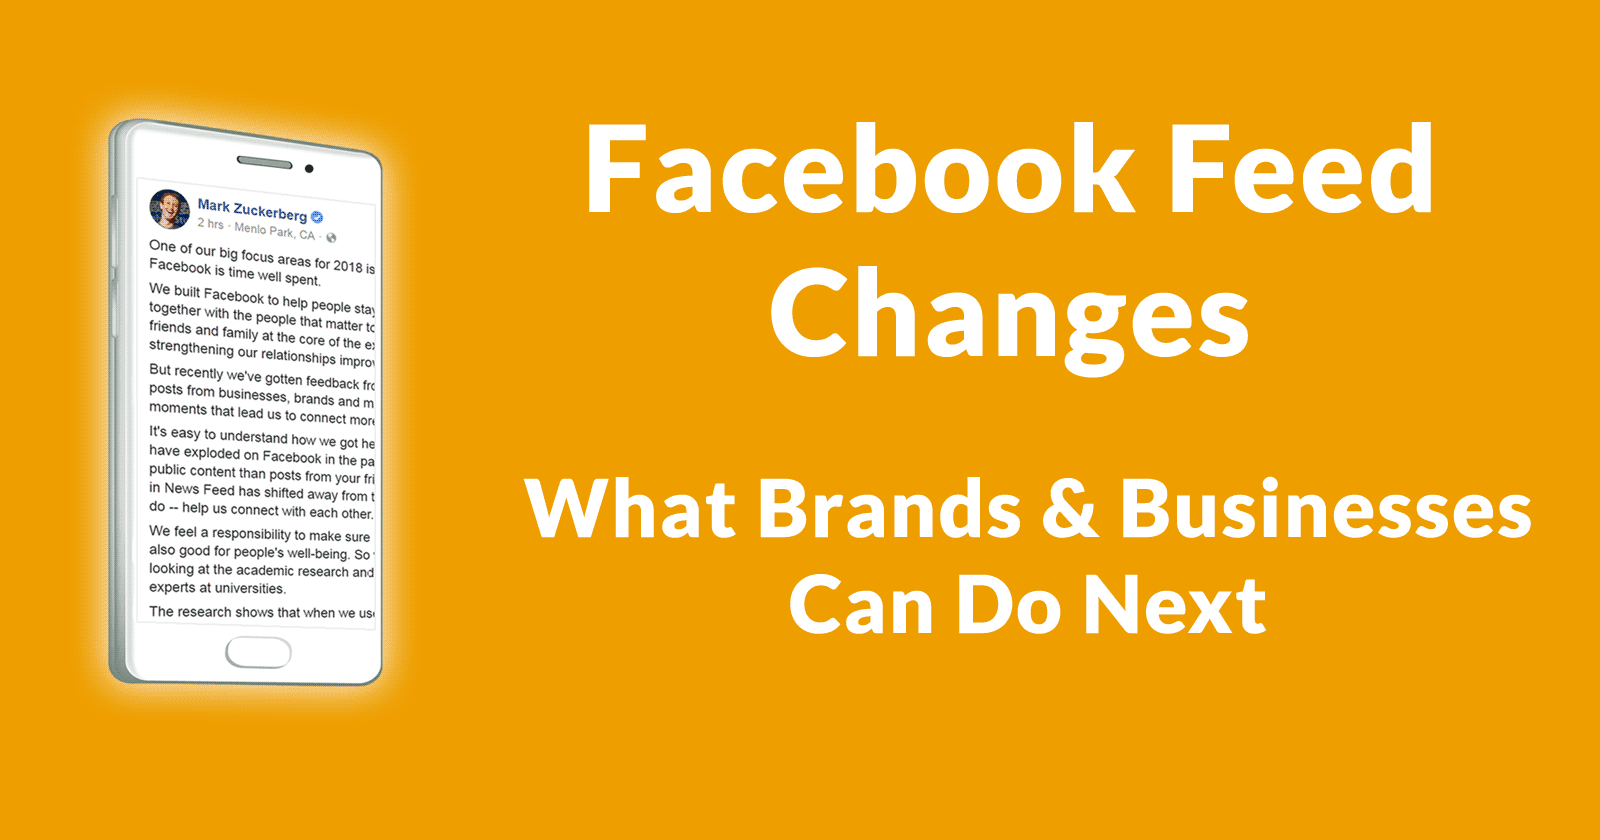 What Other Changes has Facebook Made?